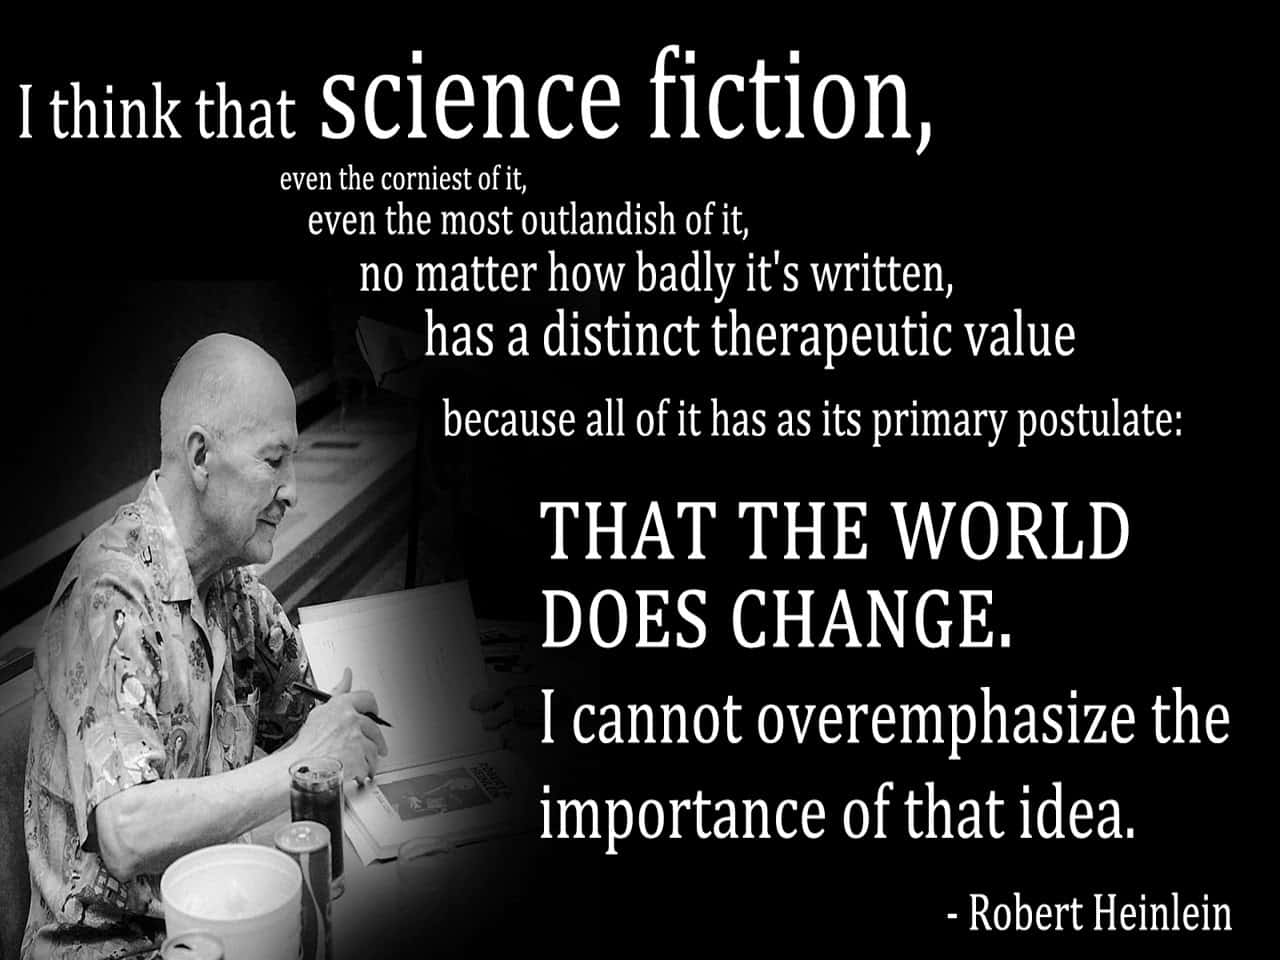 Science_ Fiction_ Therapeutic_ Value_ Quote Wallpaper